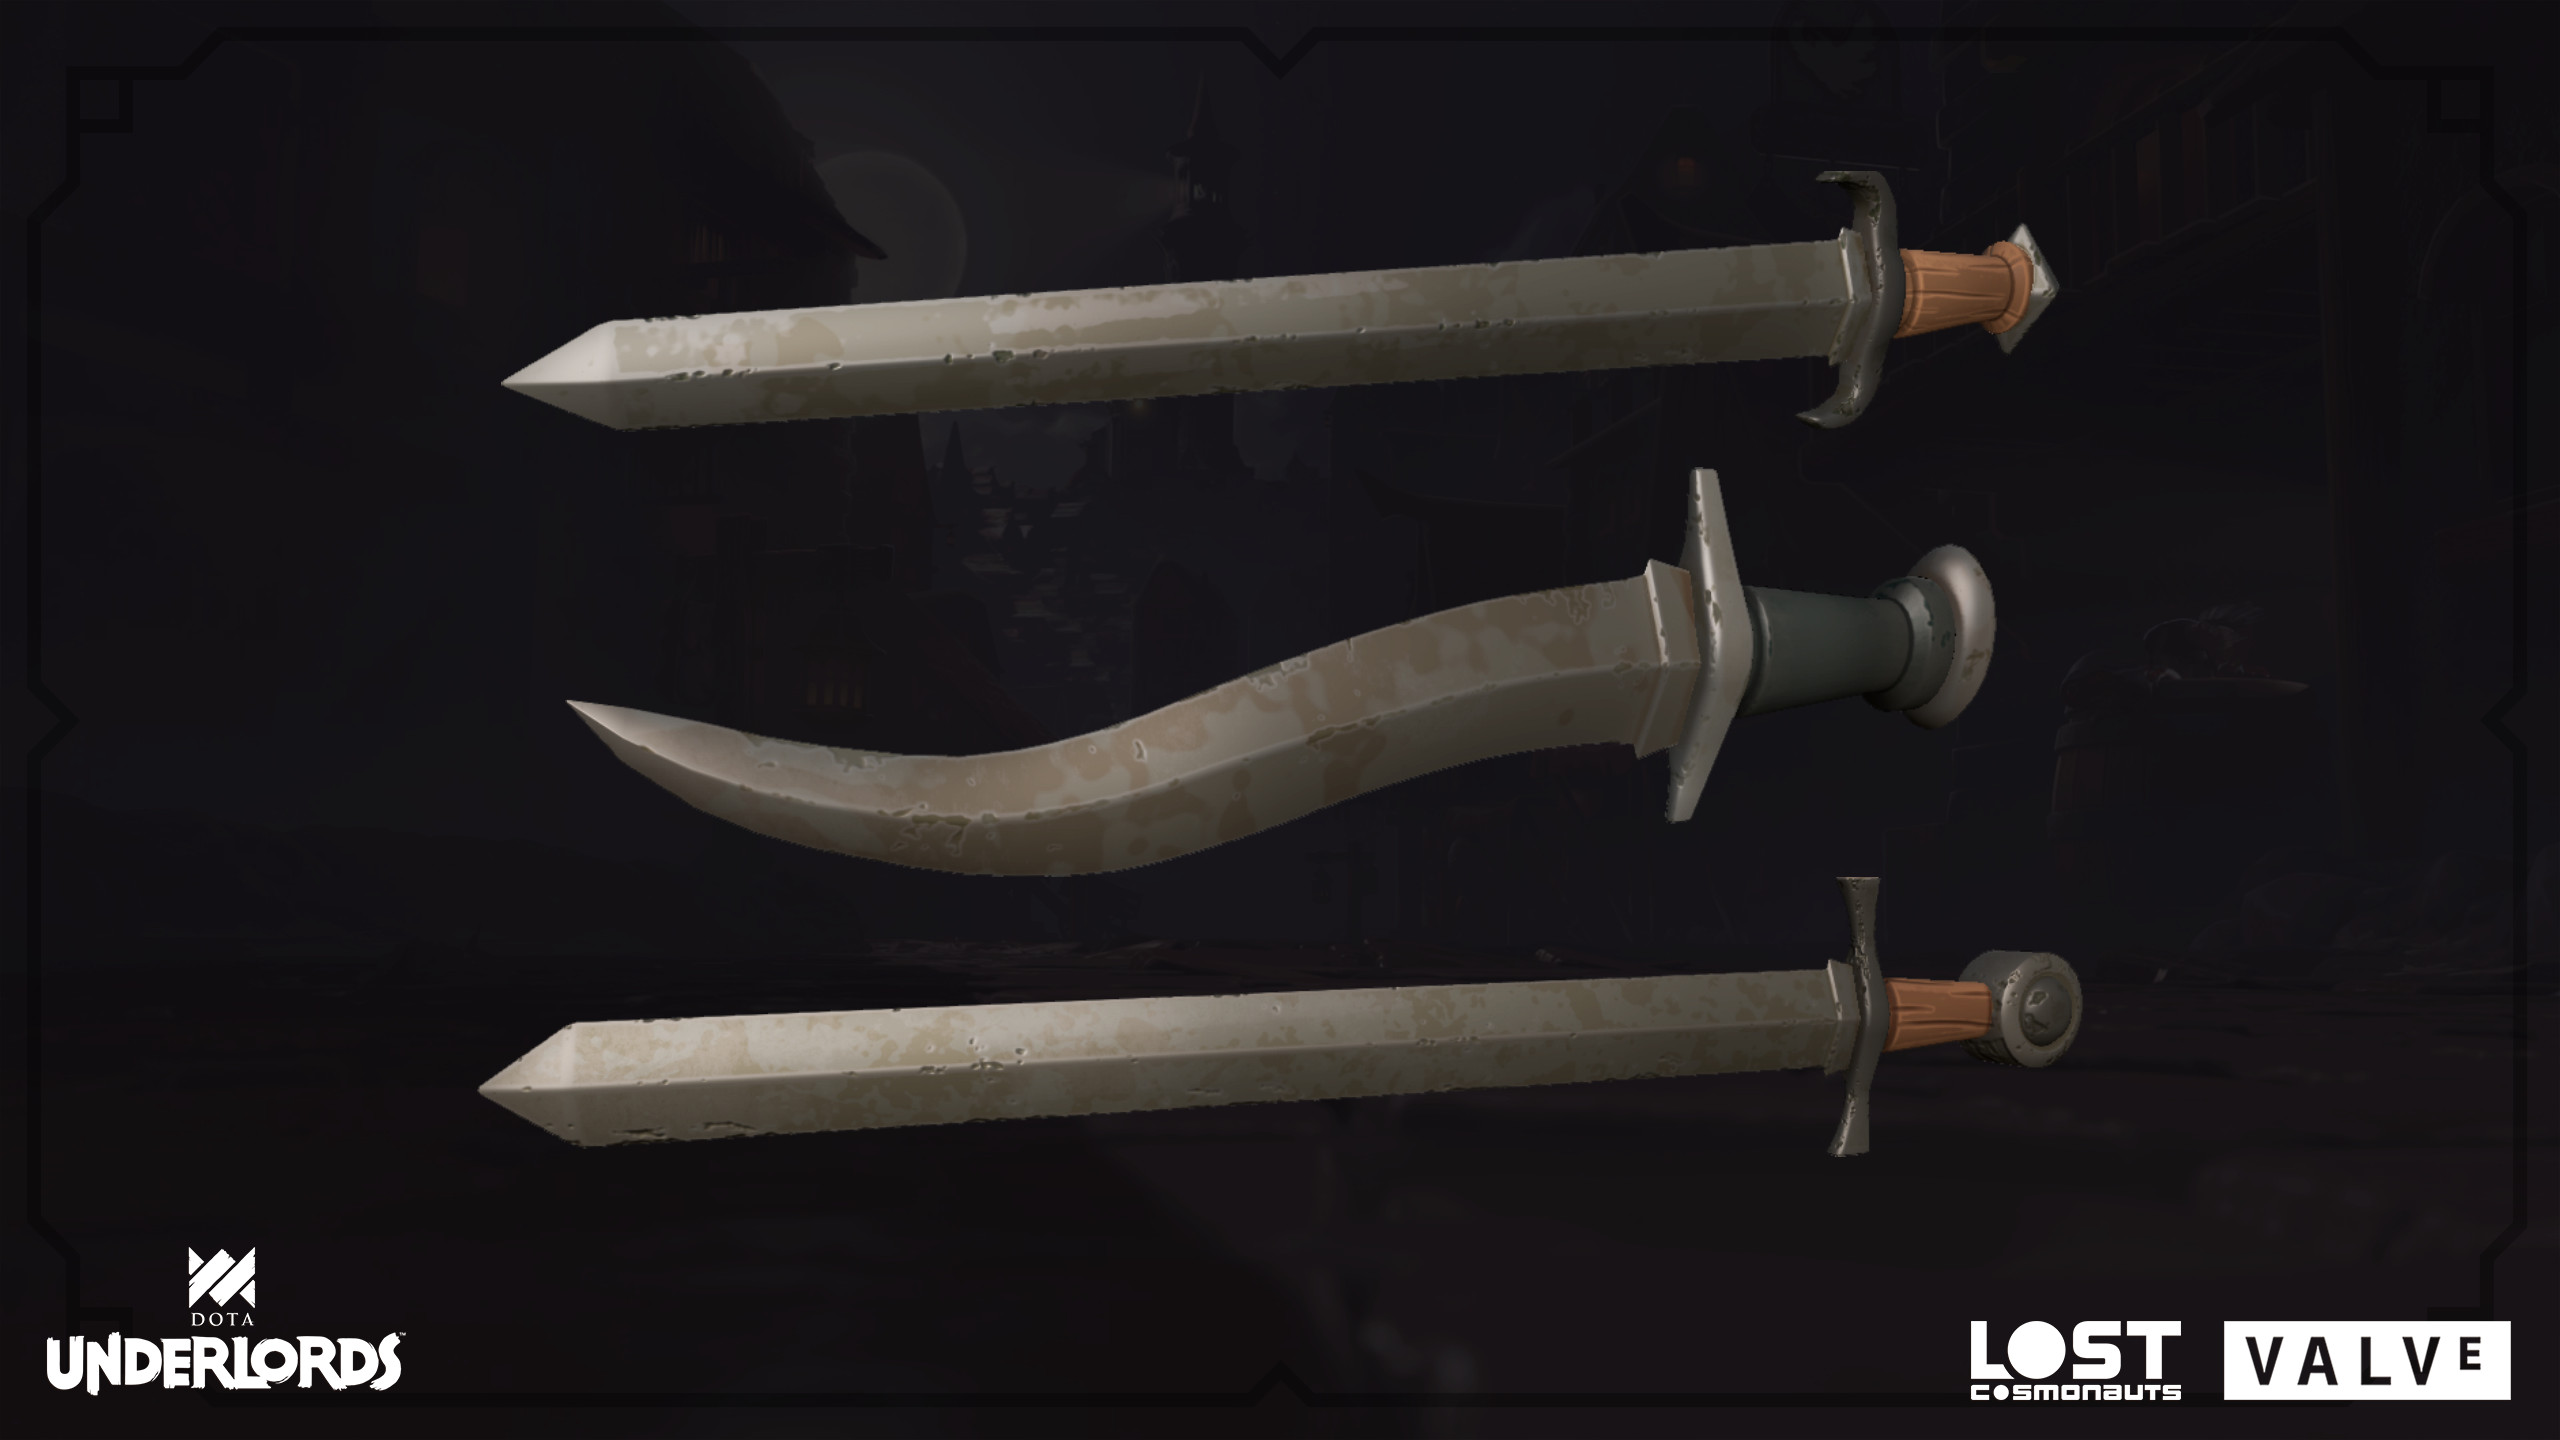 Some sword gifts for the grave shot.